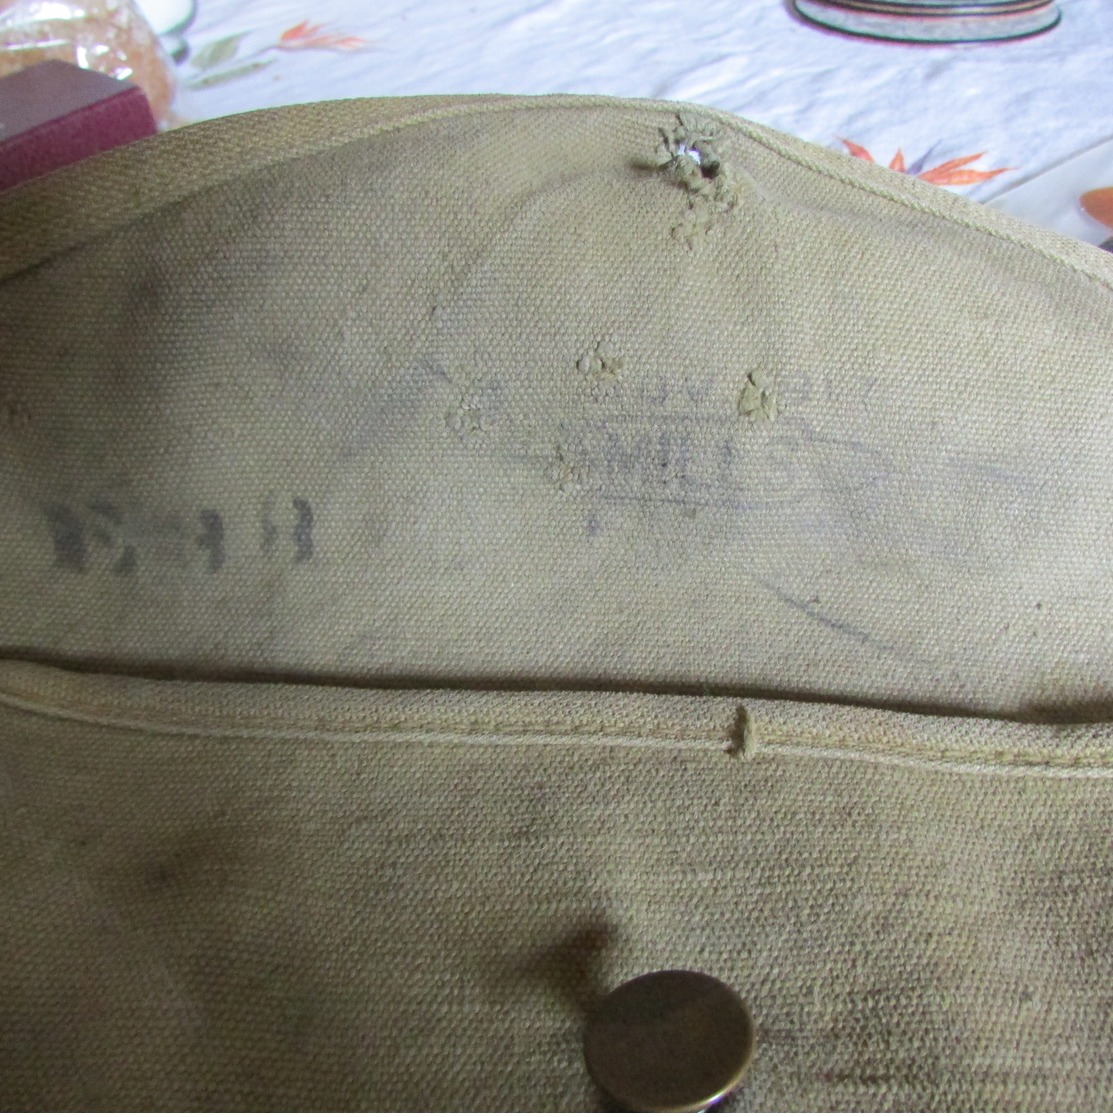 WW1 US Army Backpack Mess Tin Carrier / Pouch  1917 Dated - 1914-18